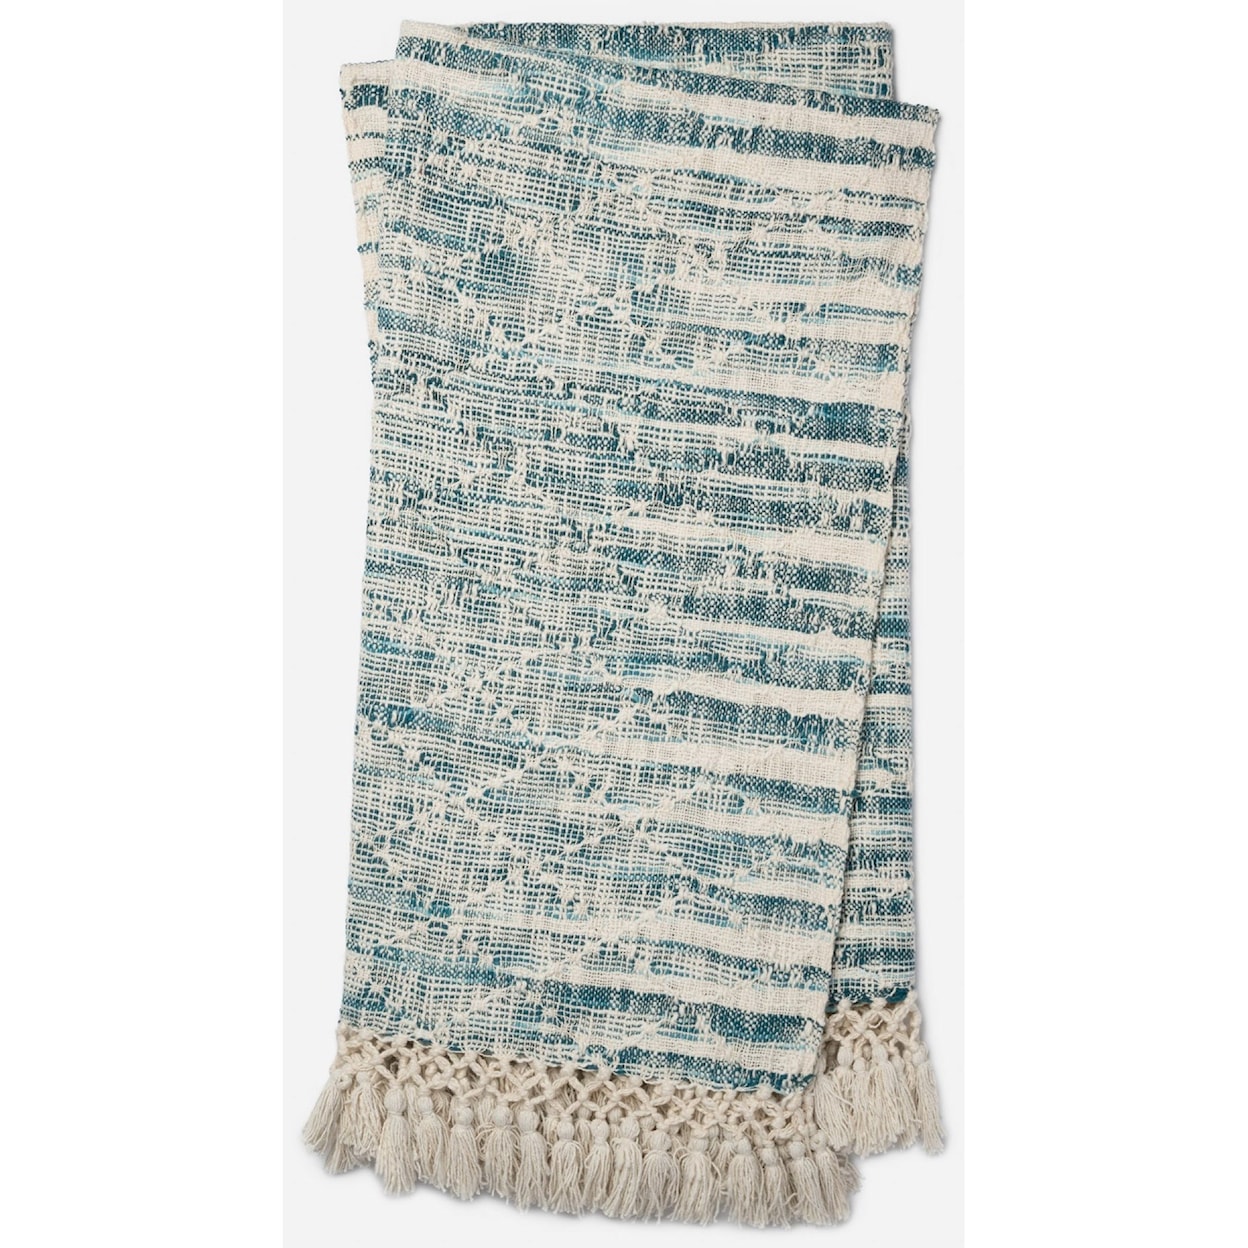 Magnolia Home by Joanna Gaines for Loloi Else 4'-2" x 5' Throw